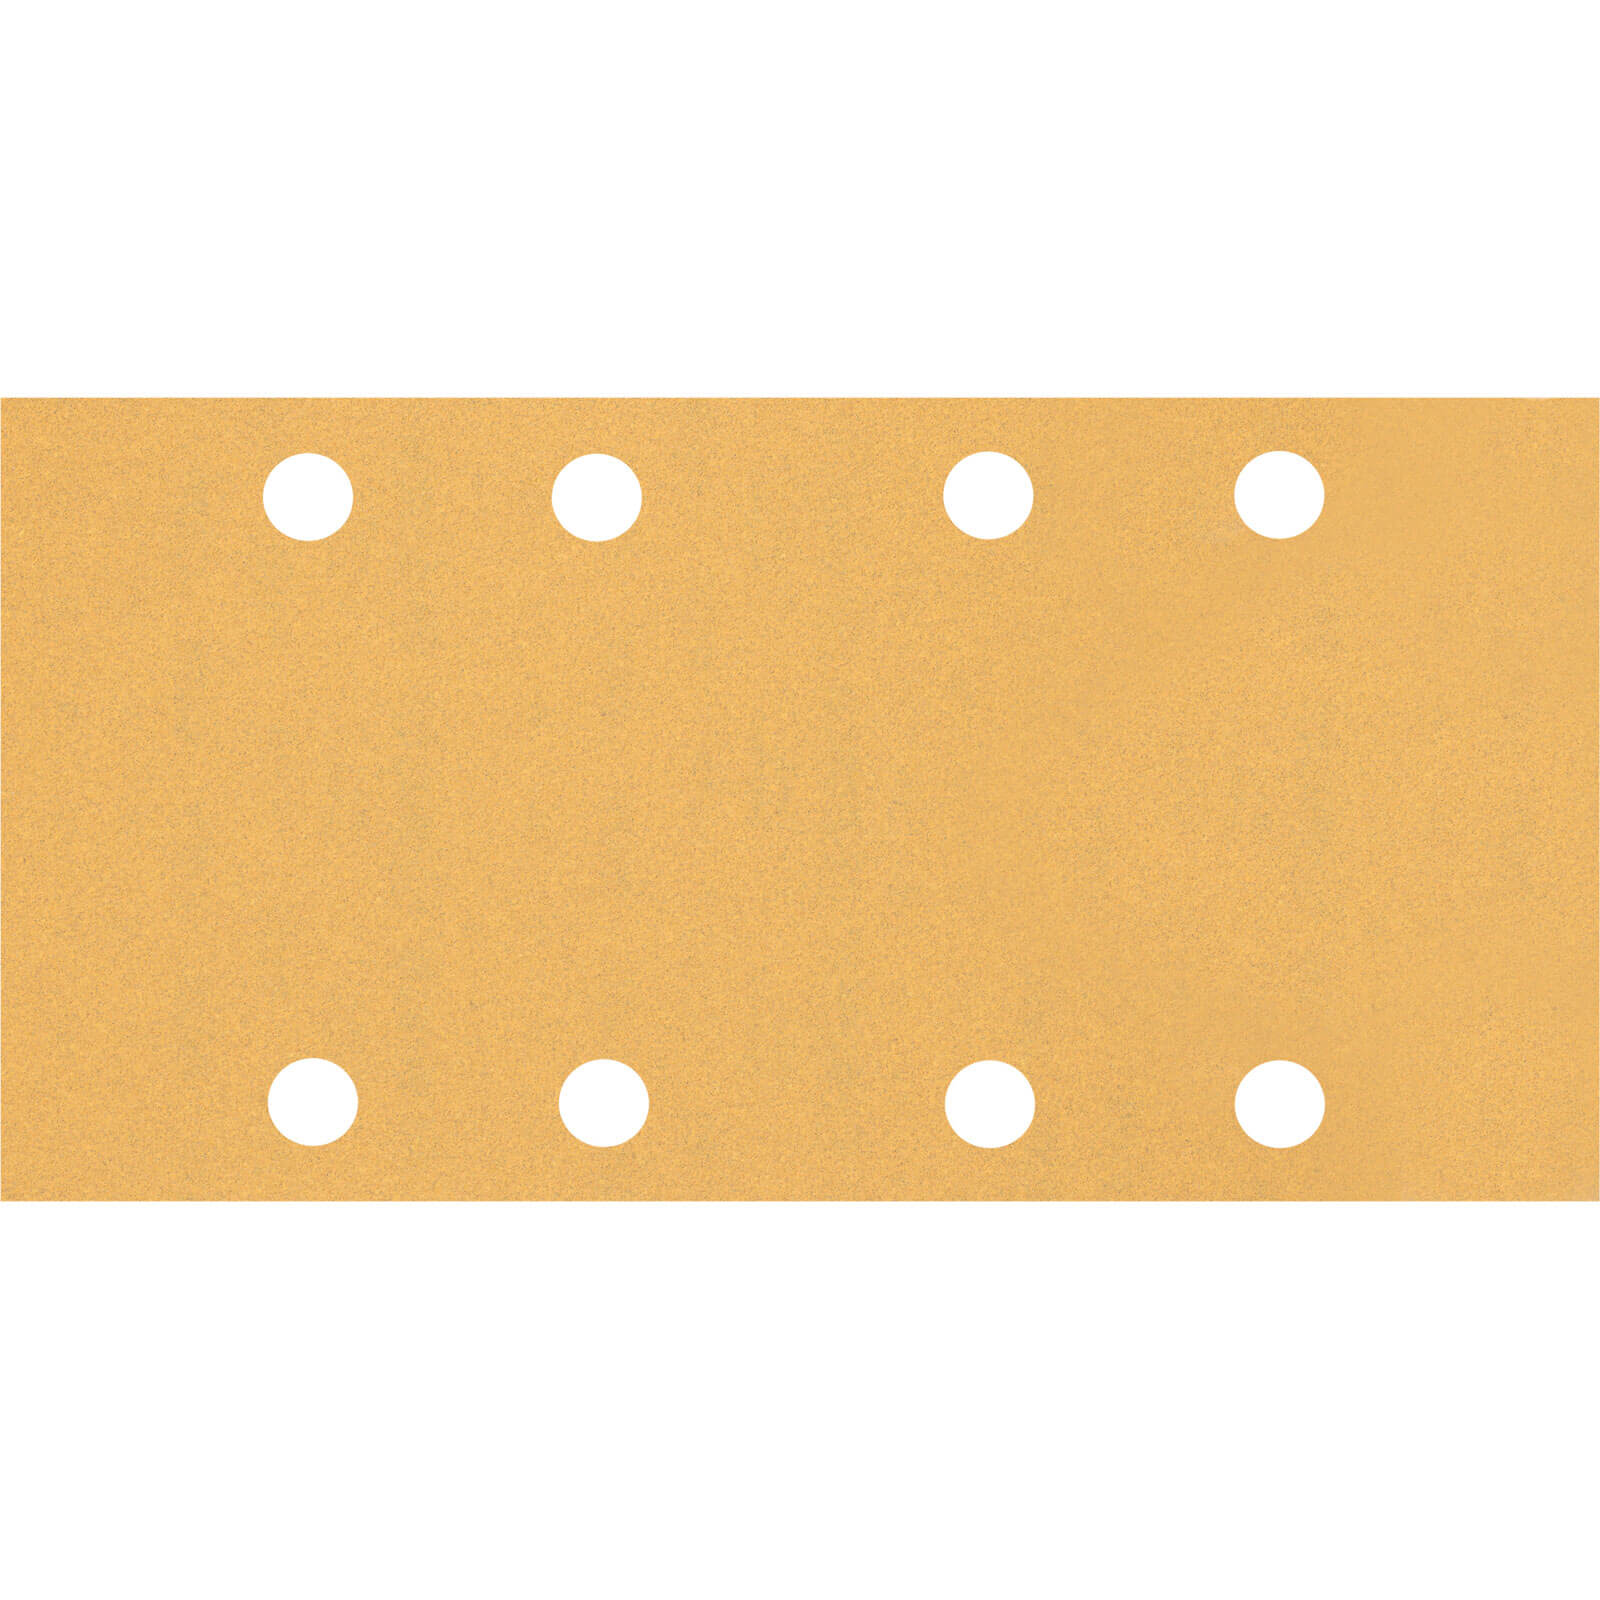 Image of Bosch Expert C470 Punched Hook and Loop Sanding Sheets 93mm x 186mm 100g Pack of 50